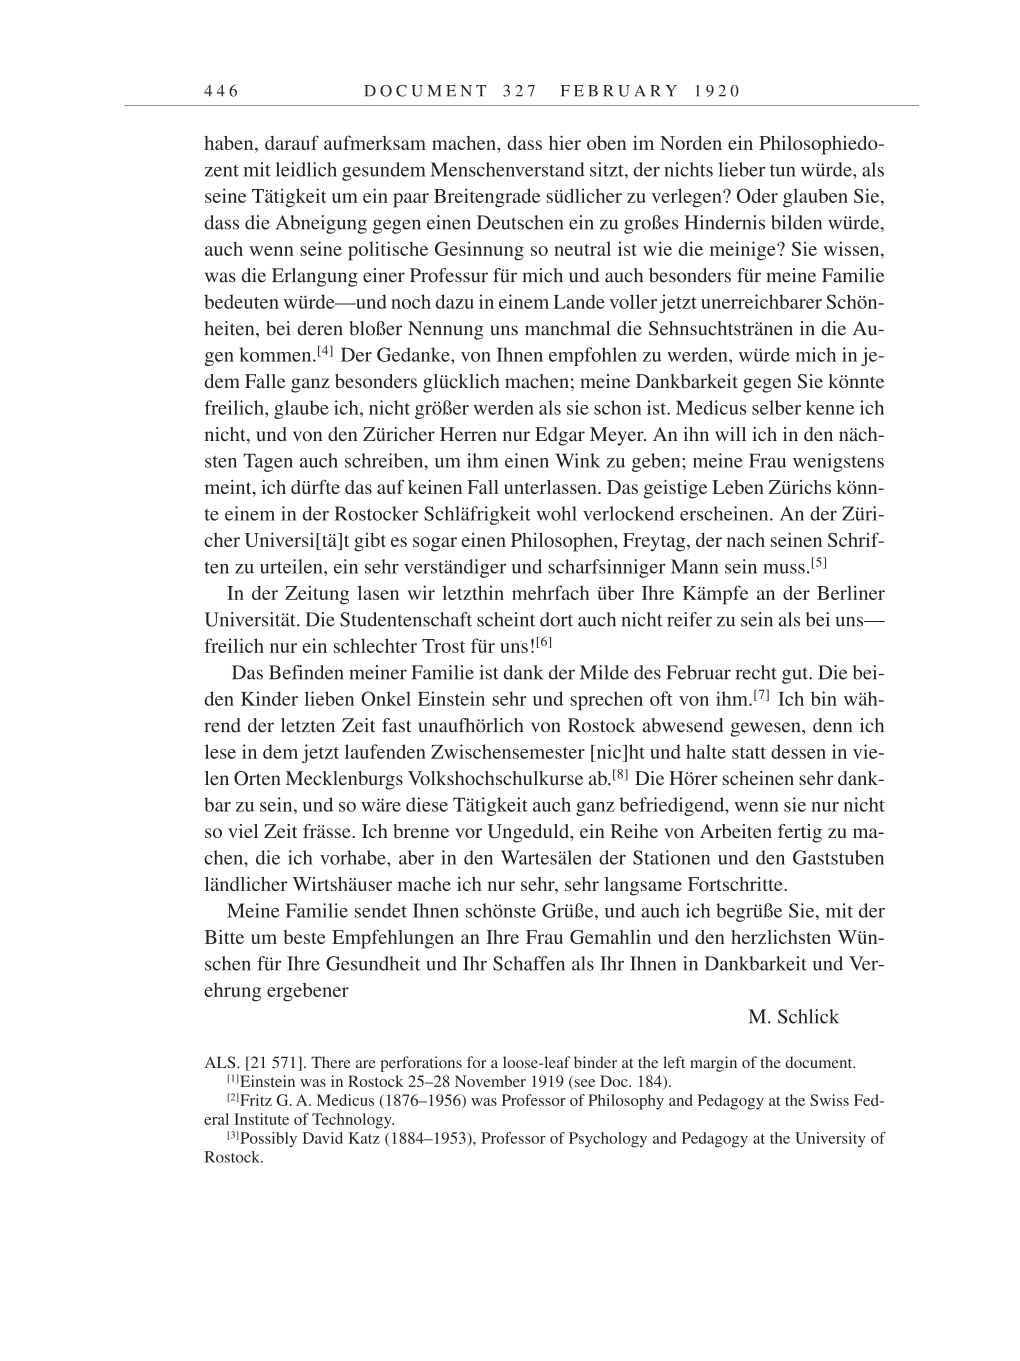 Volume 9: The Berlin Years: Correspondence January 1919-April 1920 page 446